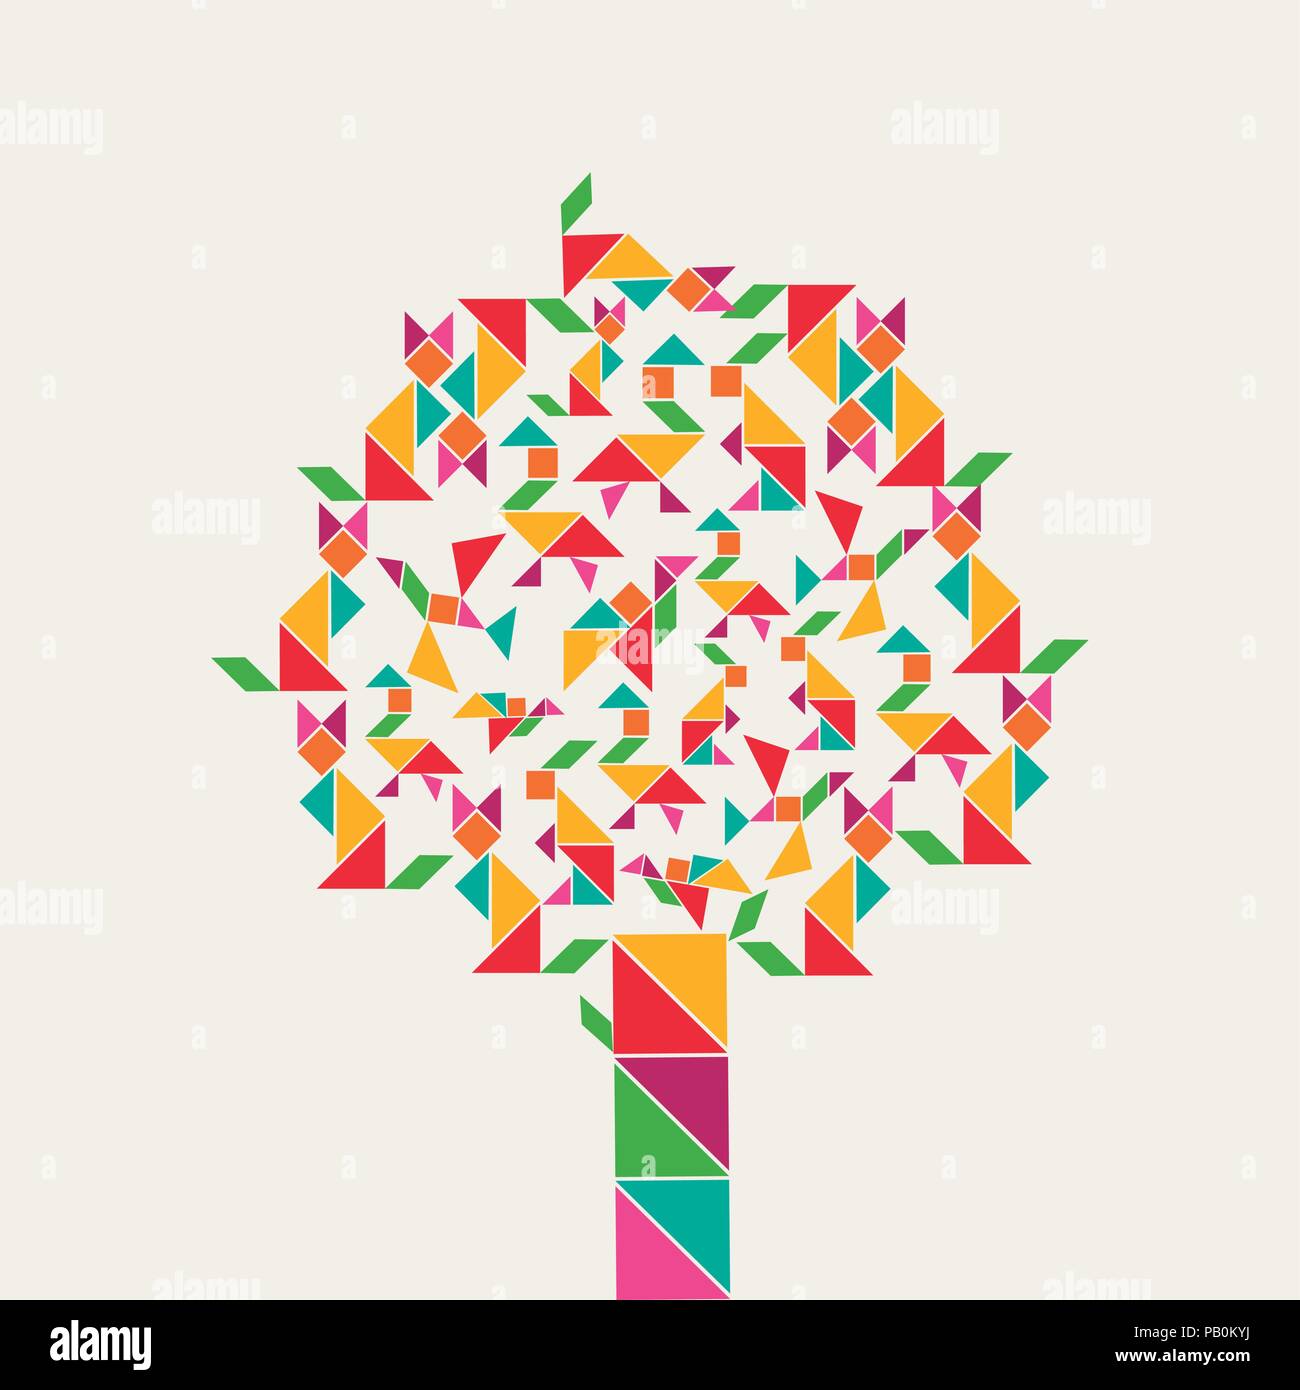 Colorful tree with tangram game icons, abstract geometry shapes of animals. Illustration concept for kids learning or education. EPS10 vector Stock Vector